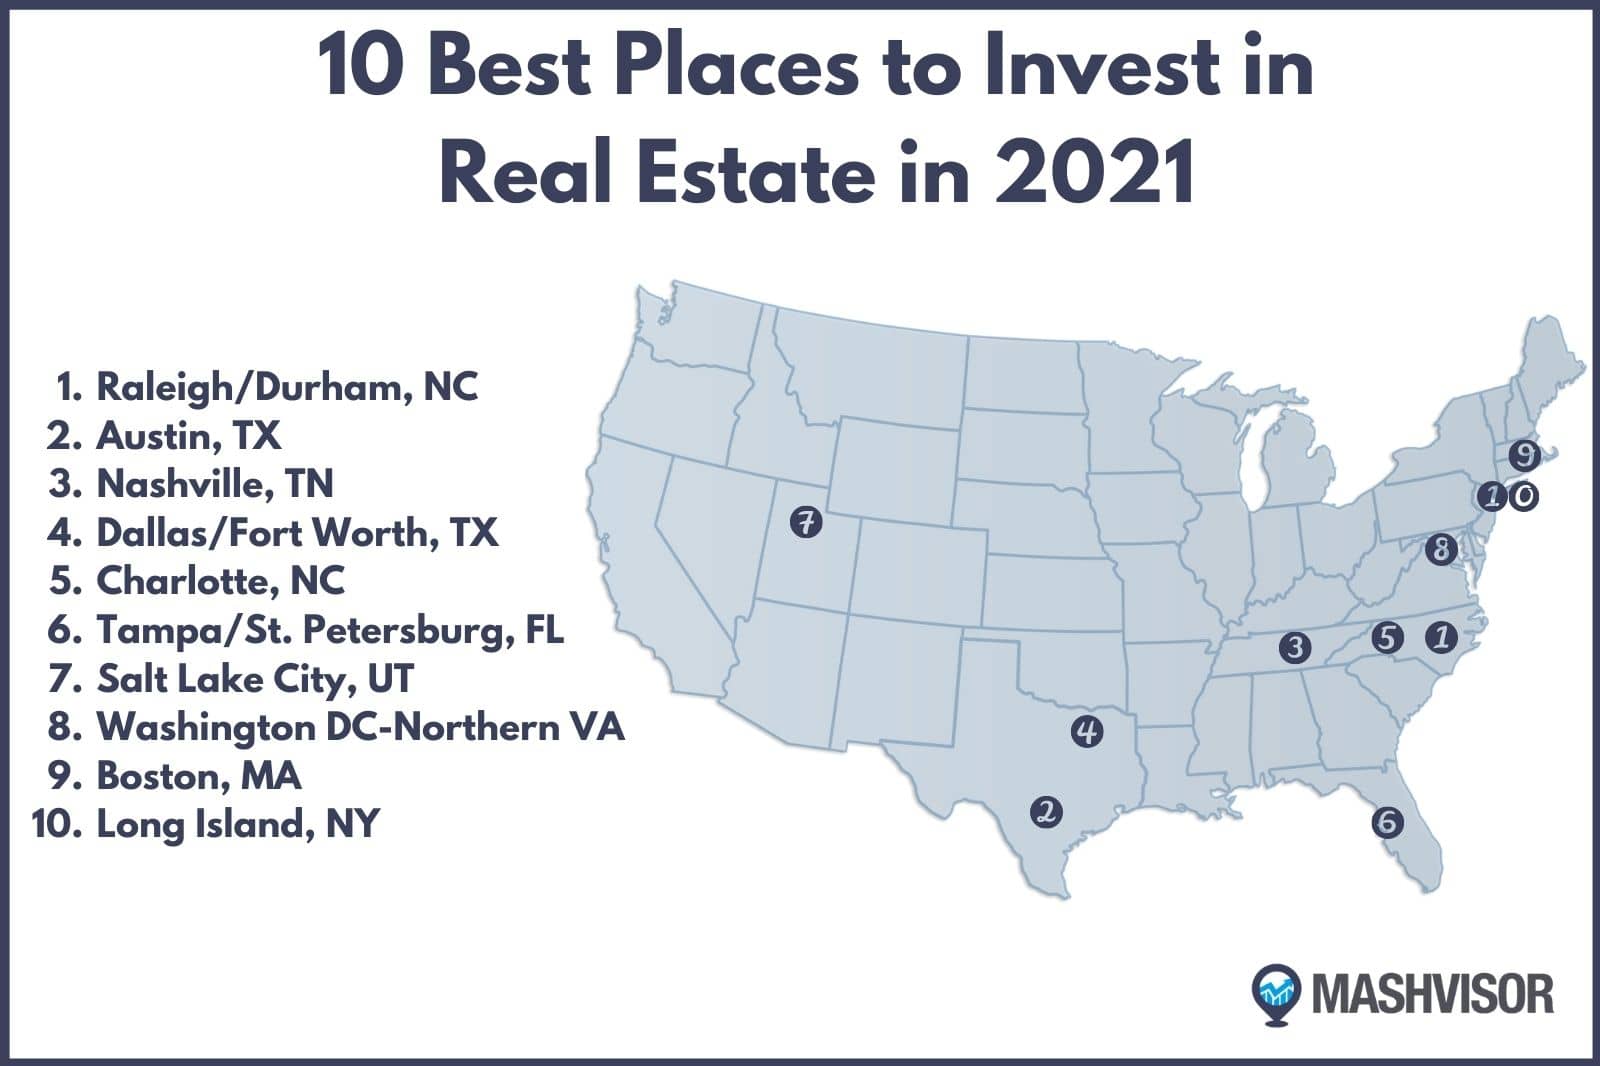 10 Best Places to Invest in Real Estate in 2021 Mashvisor